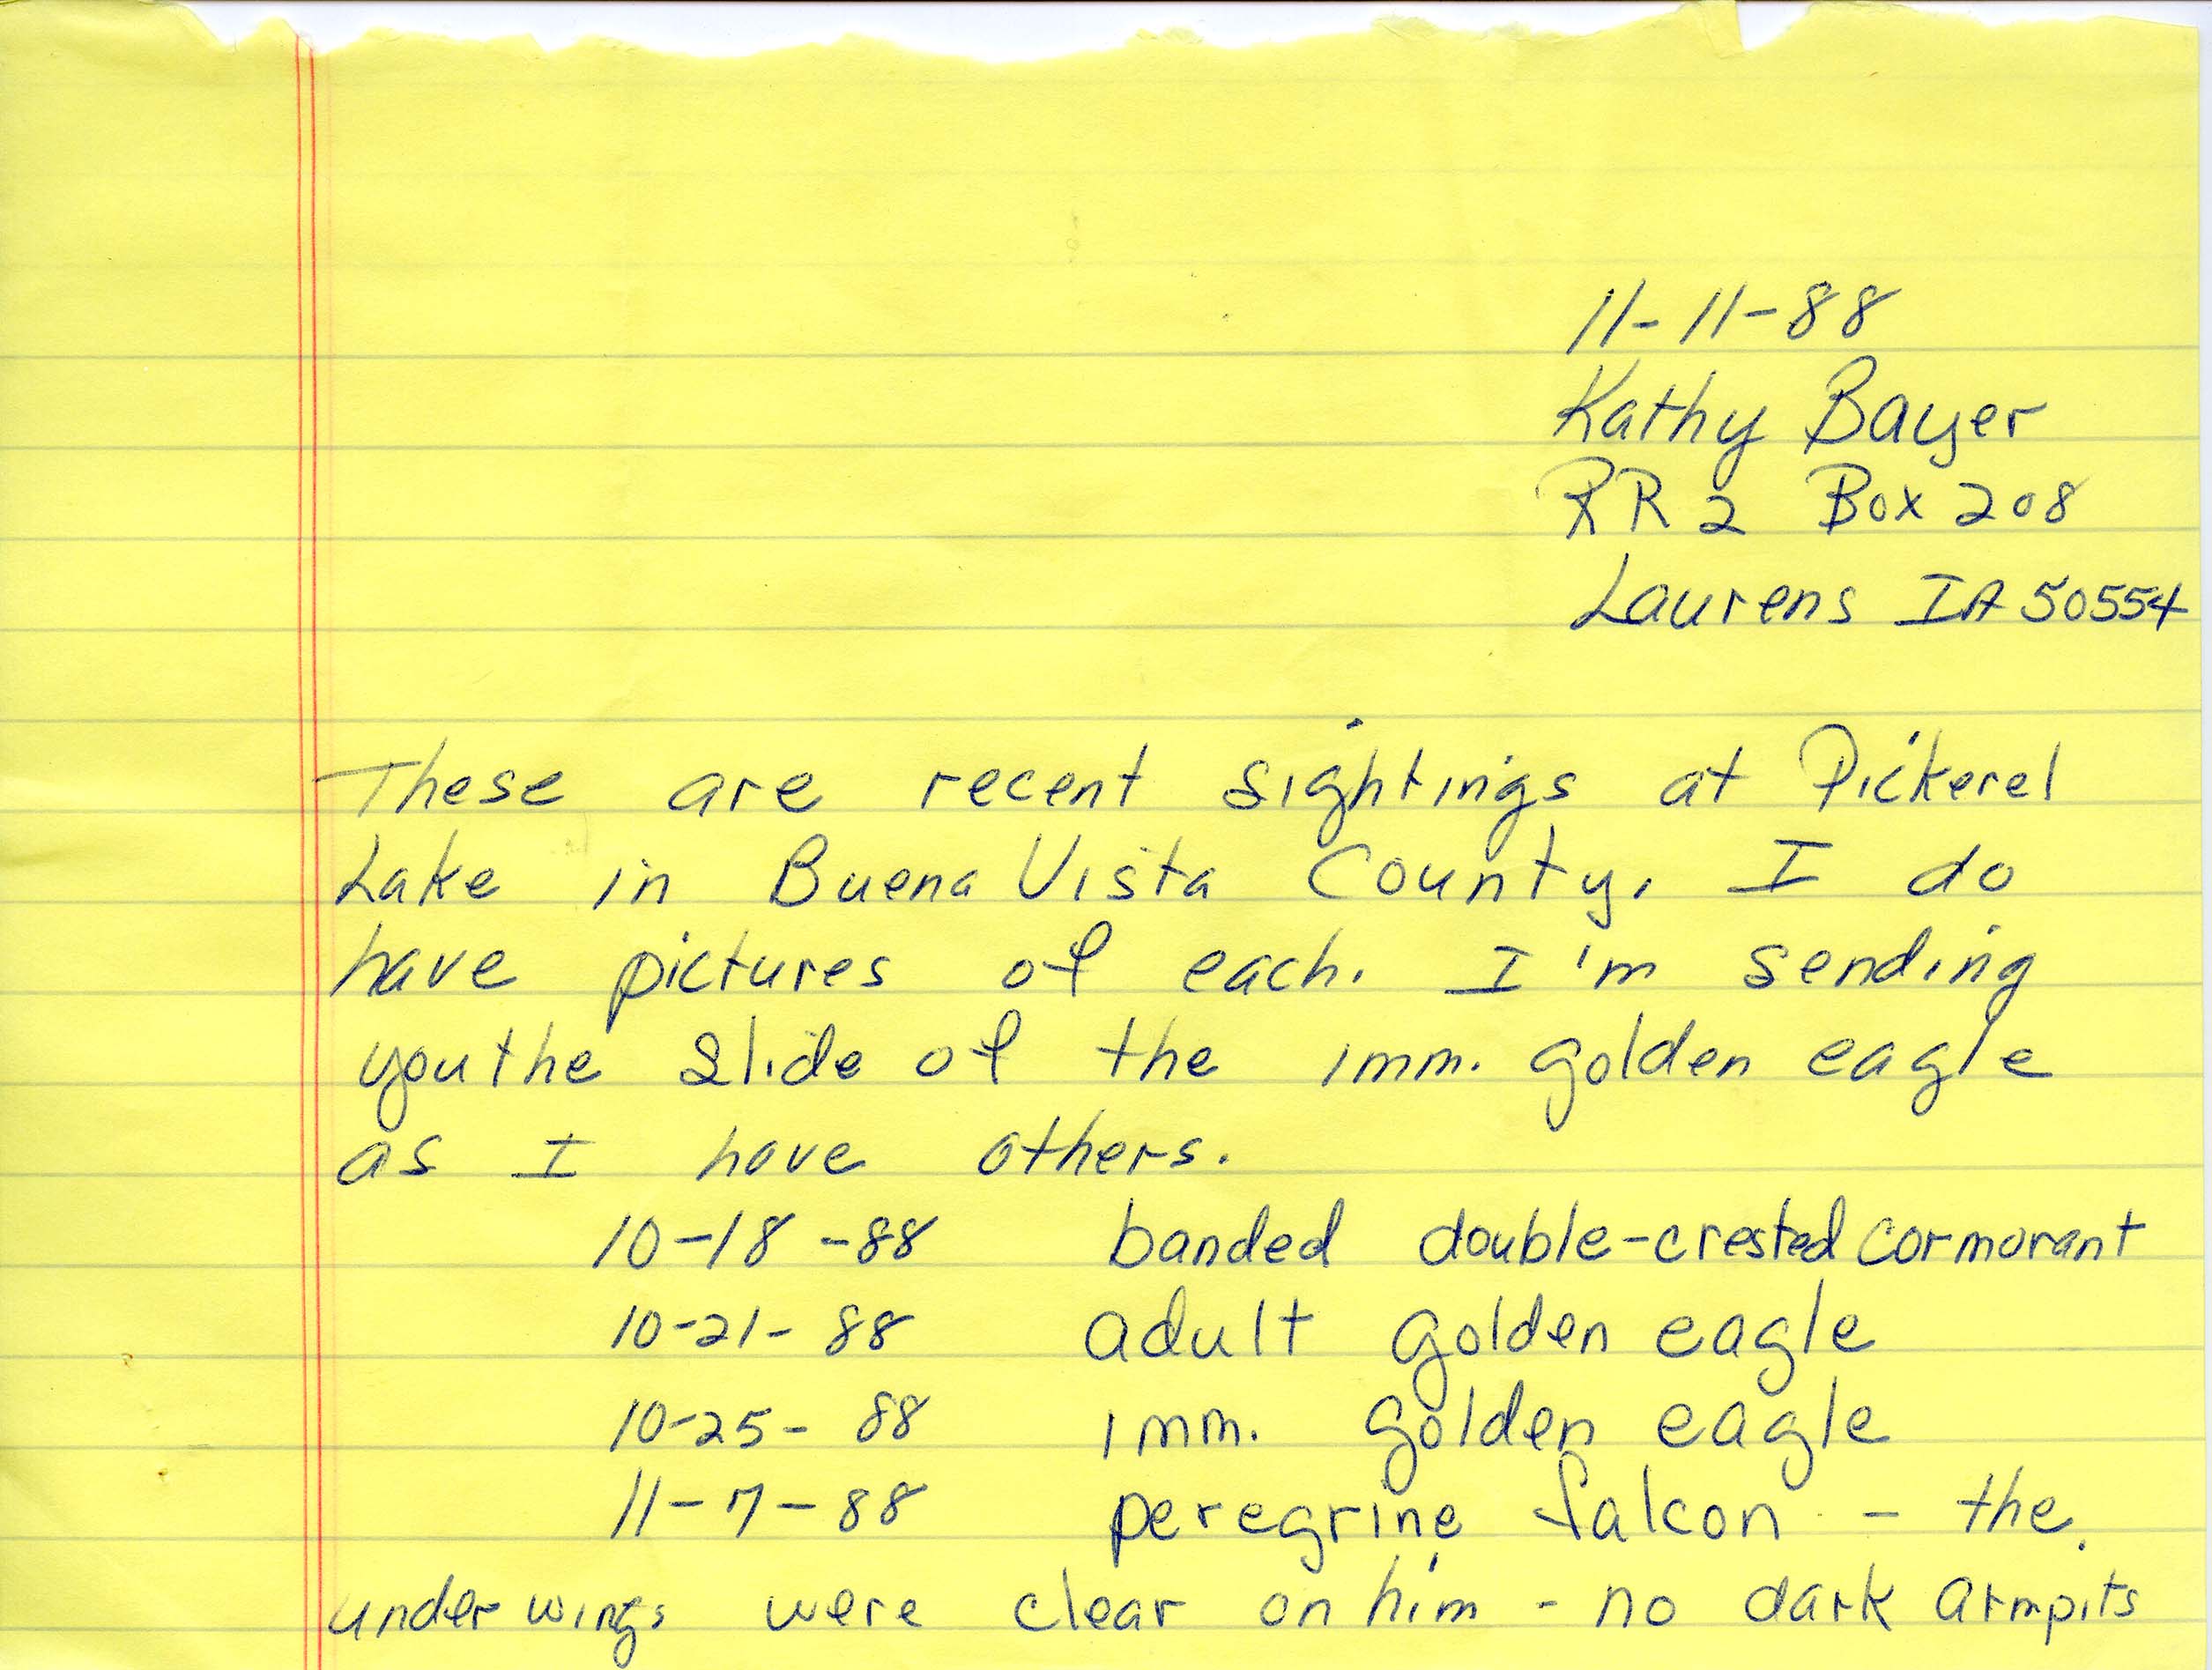 Field notes contributed by Kathy Bayer, November 11, 1988